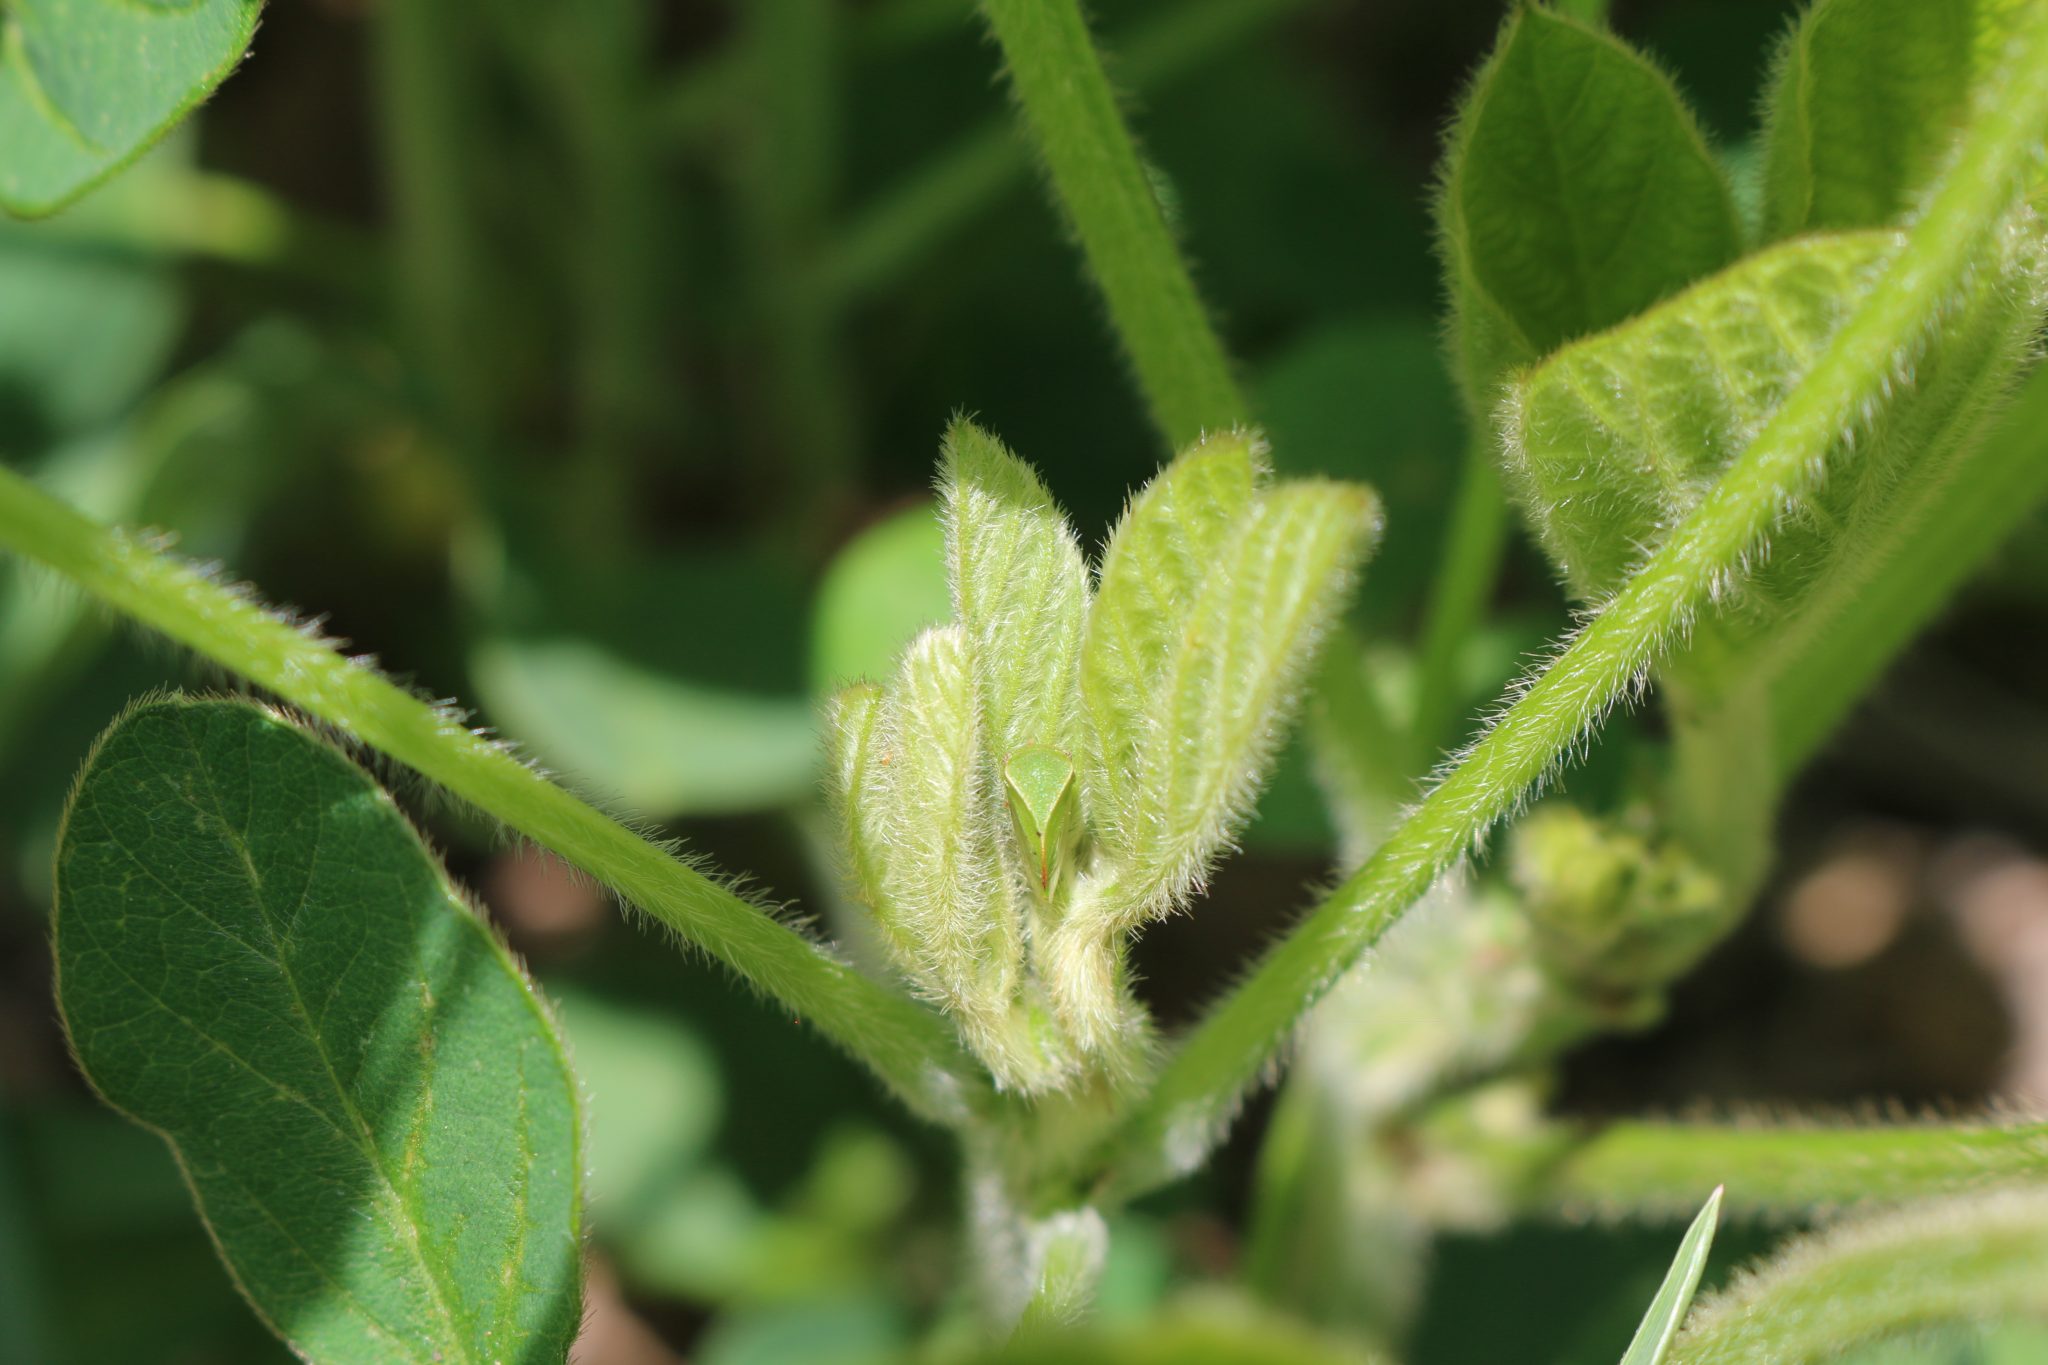 soybean pod in the early stages